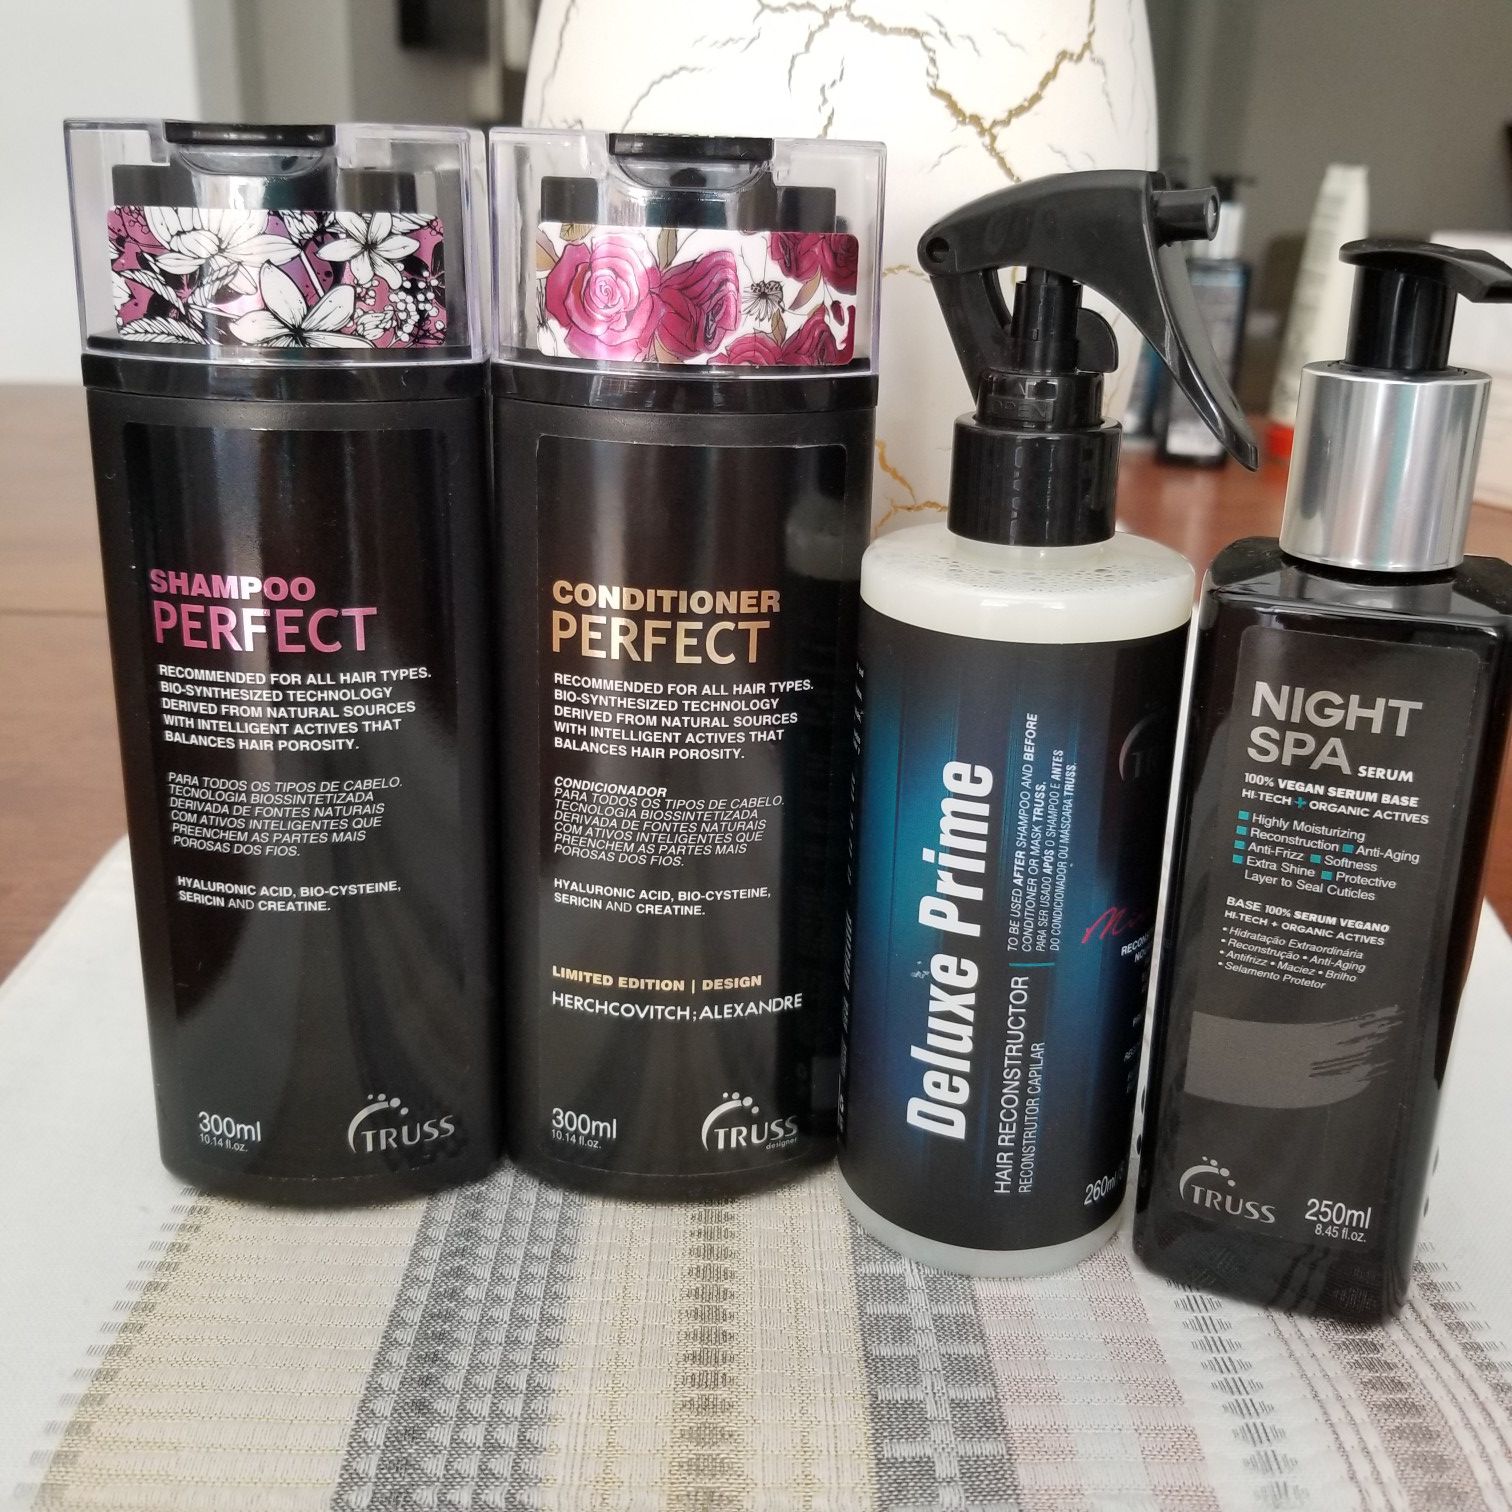 Truss hair care line: shampoo, conditioner, night serum and hair reconstructor